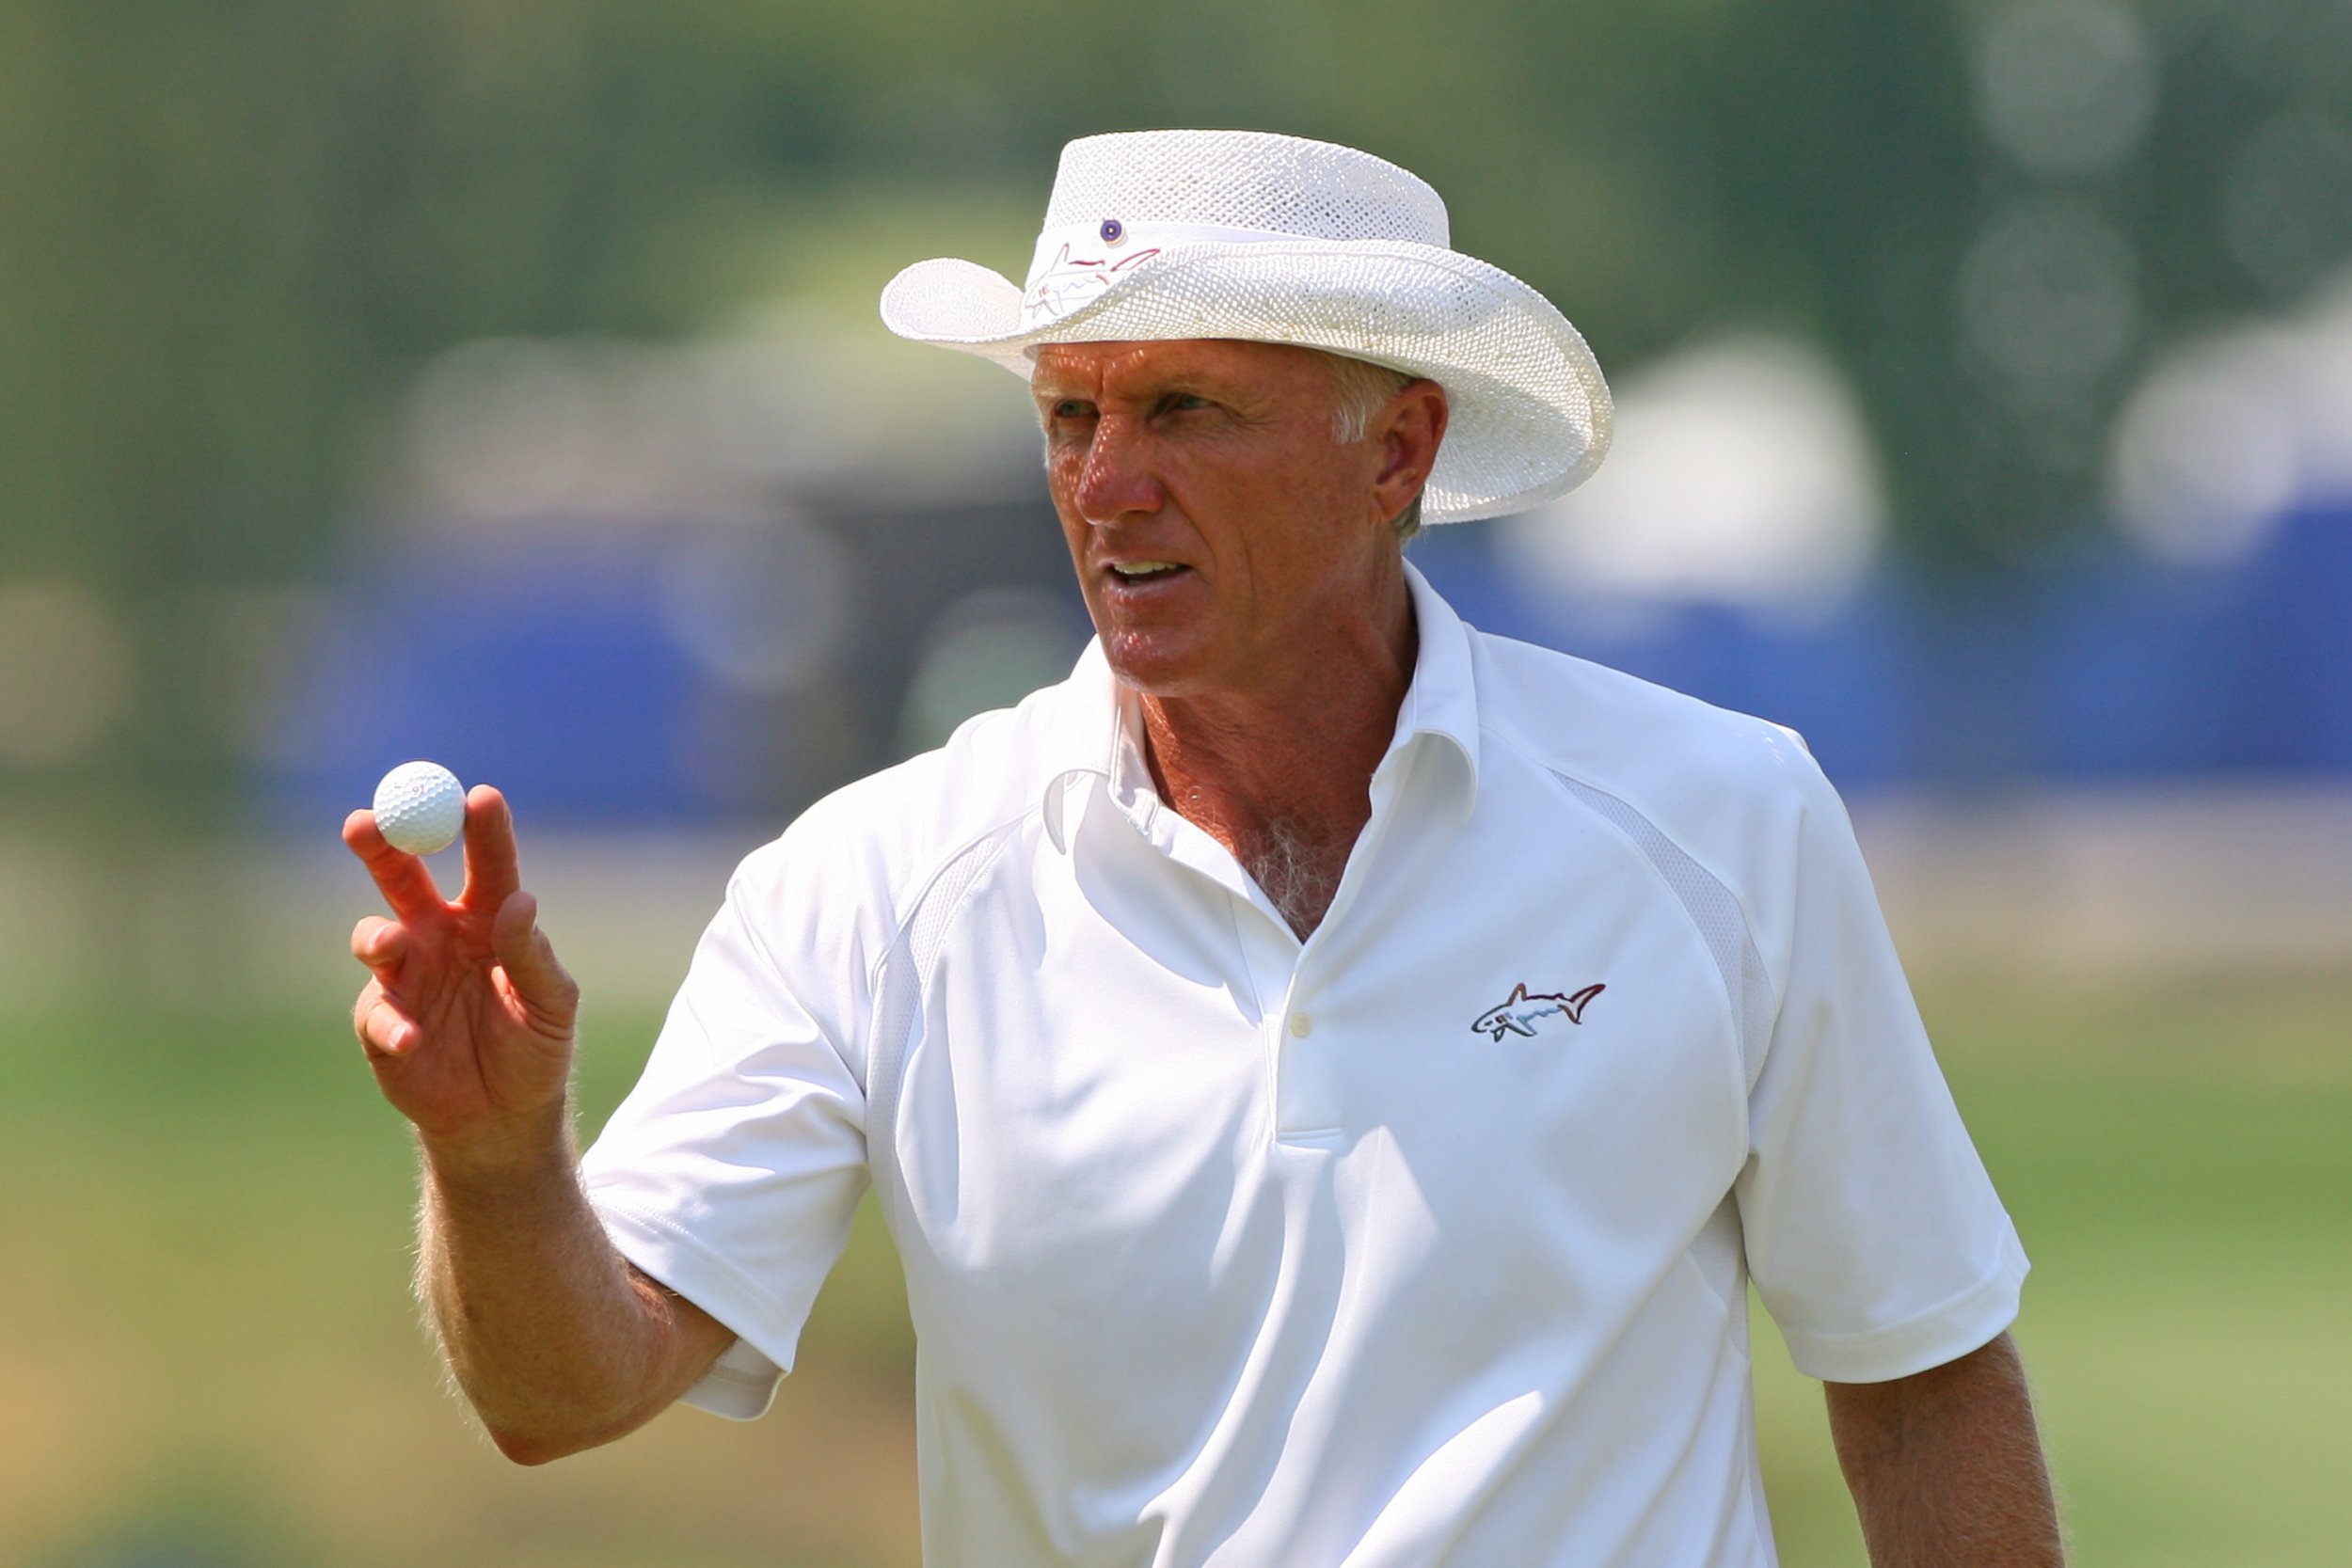 Greg Norman wearing a white polo shirt and white cowboy hat while holding a golf ball